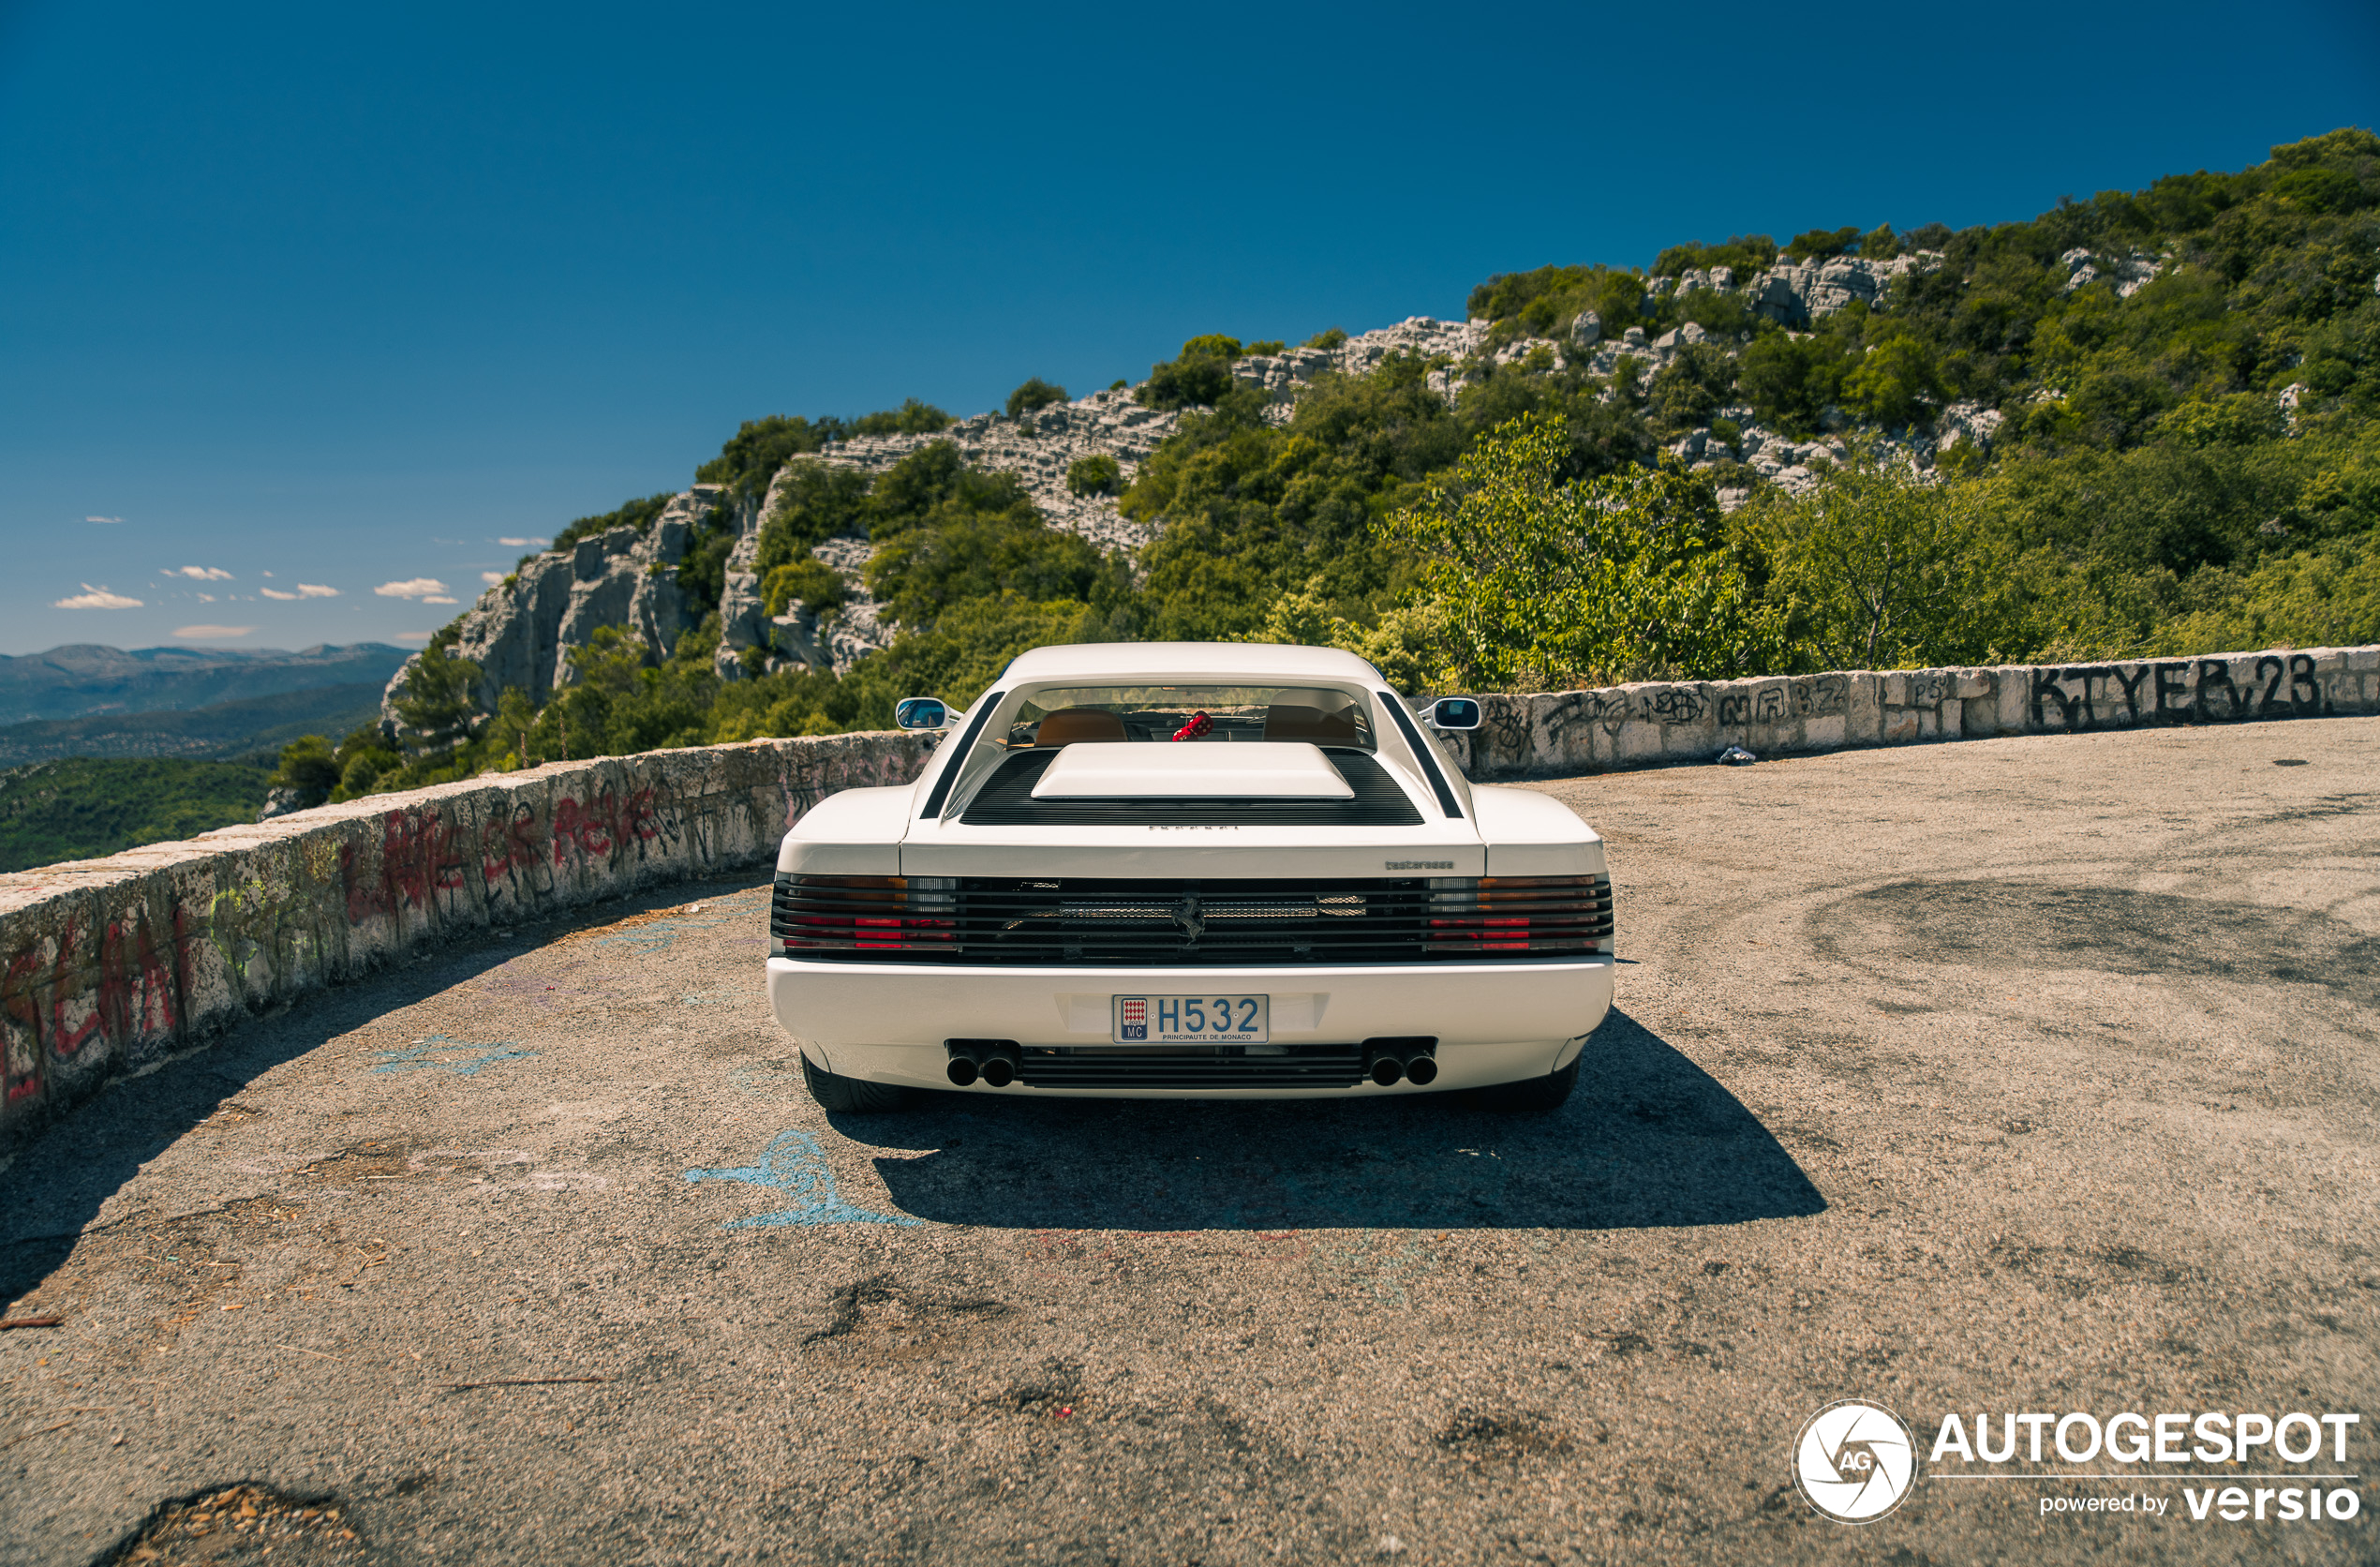 A white Testarossa captured in the mountains of southern France